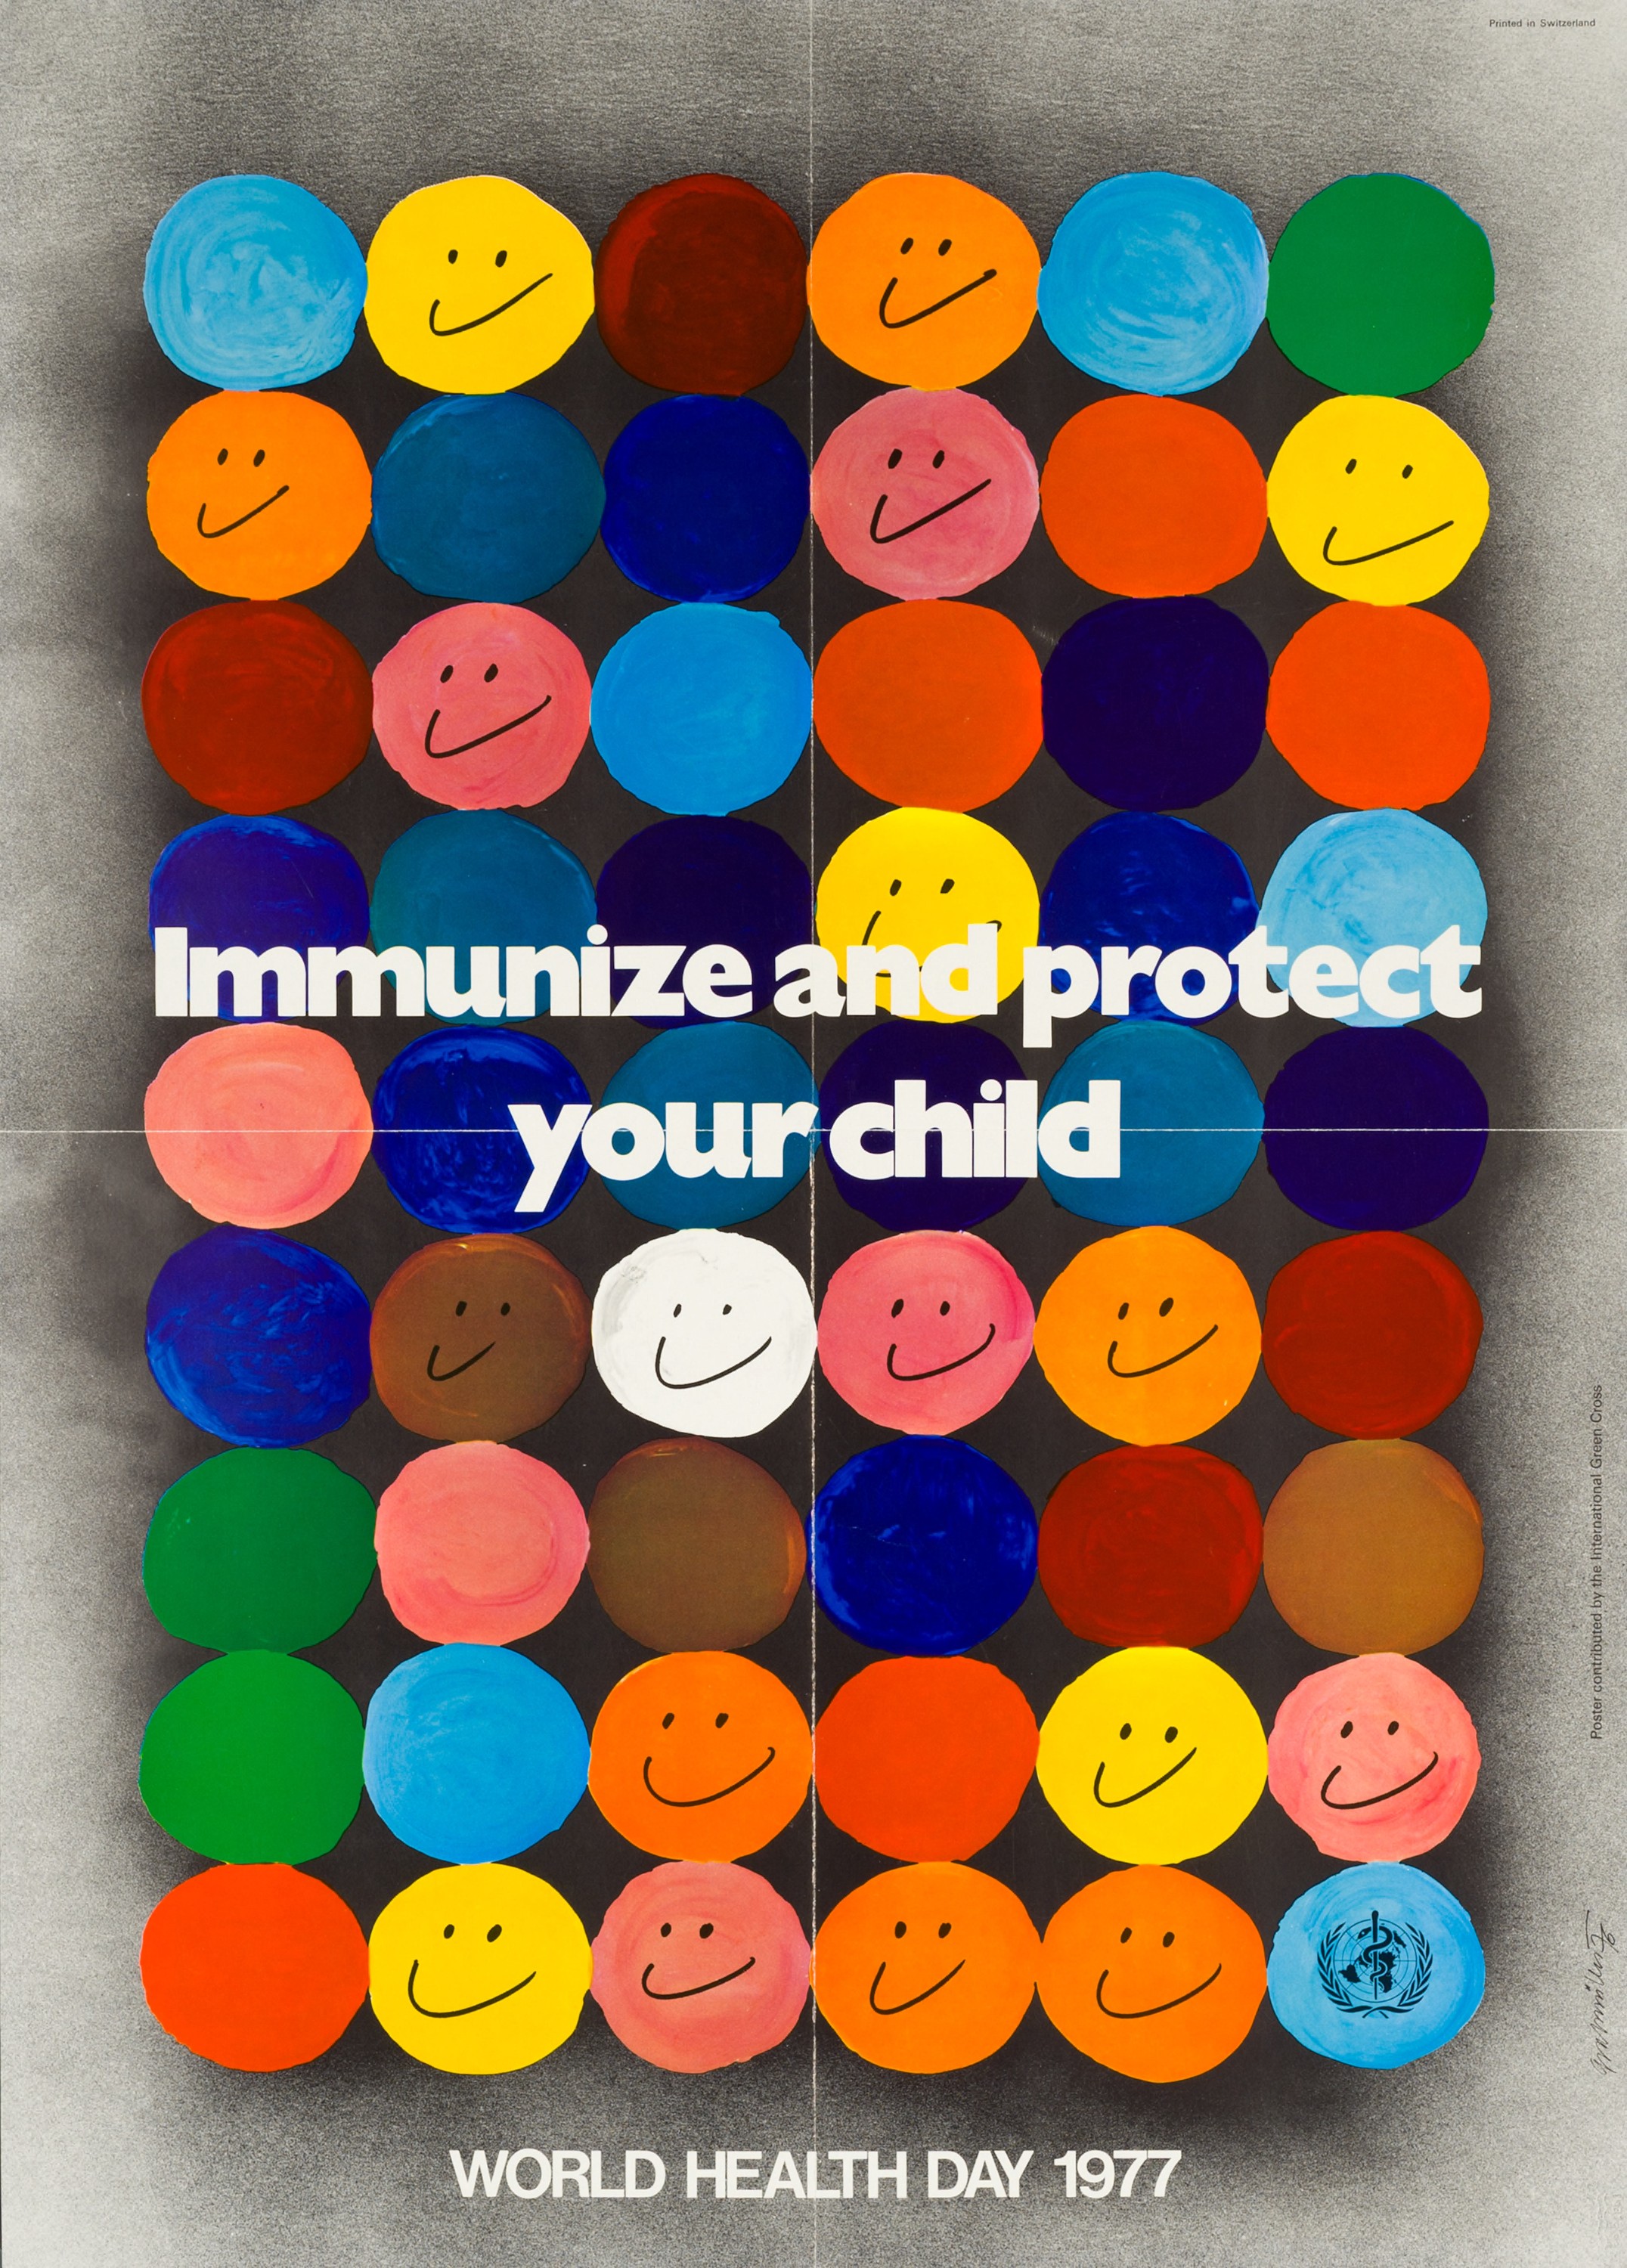 Immunize and protect your child poster